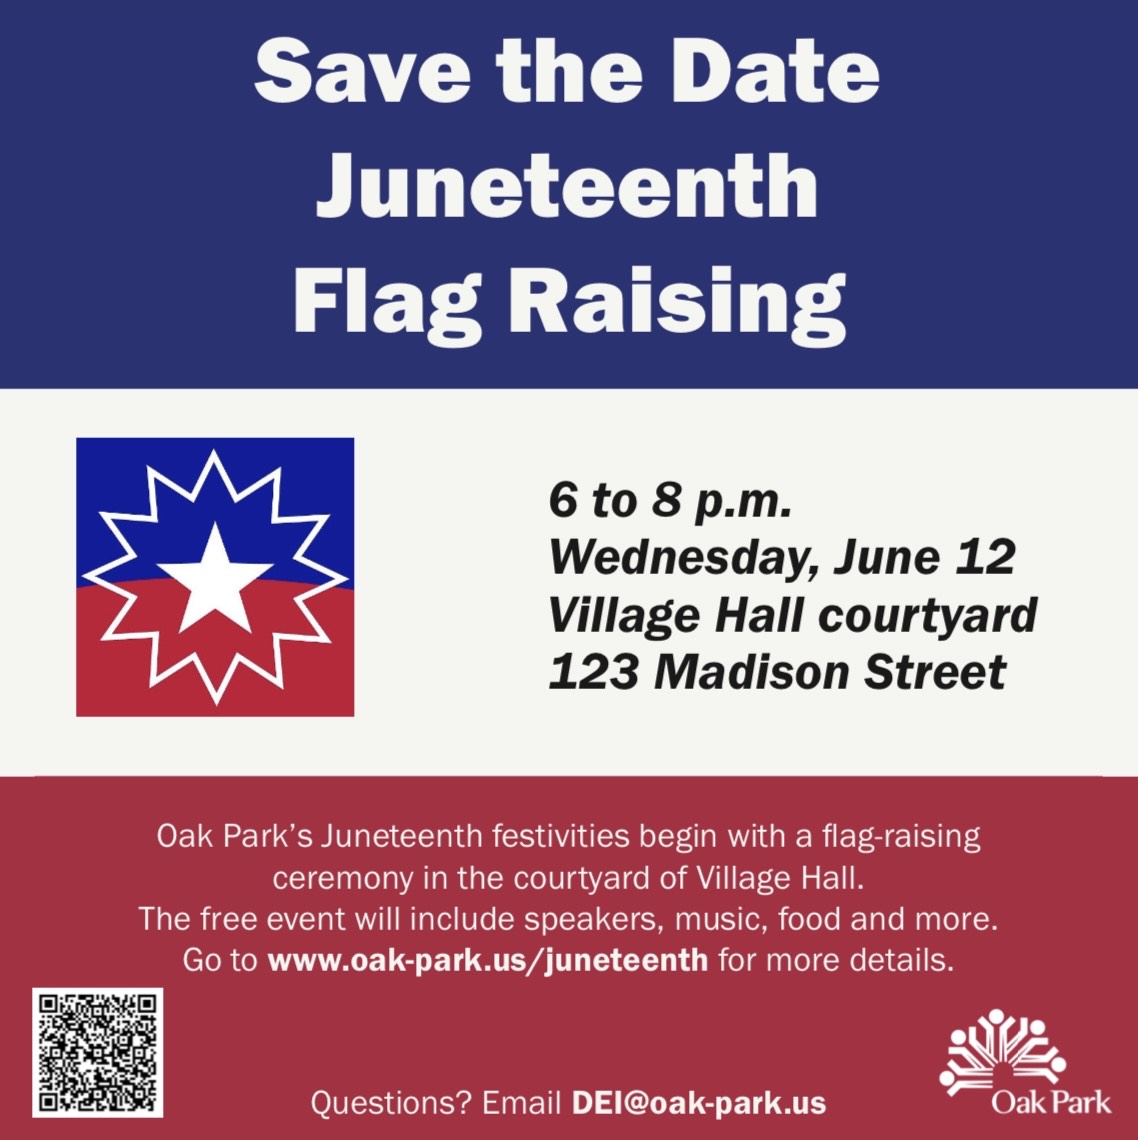 Save the Date Juneteenth Flag Raising